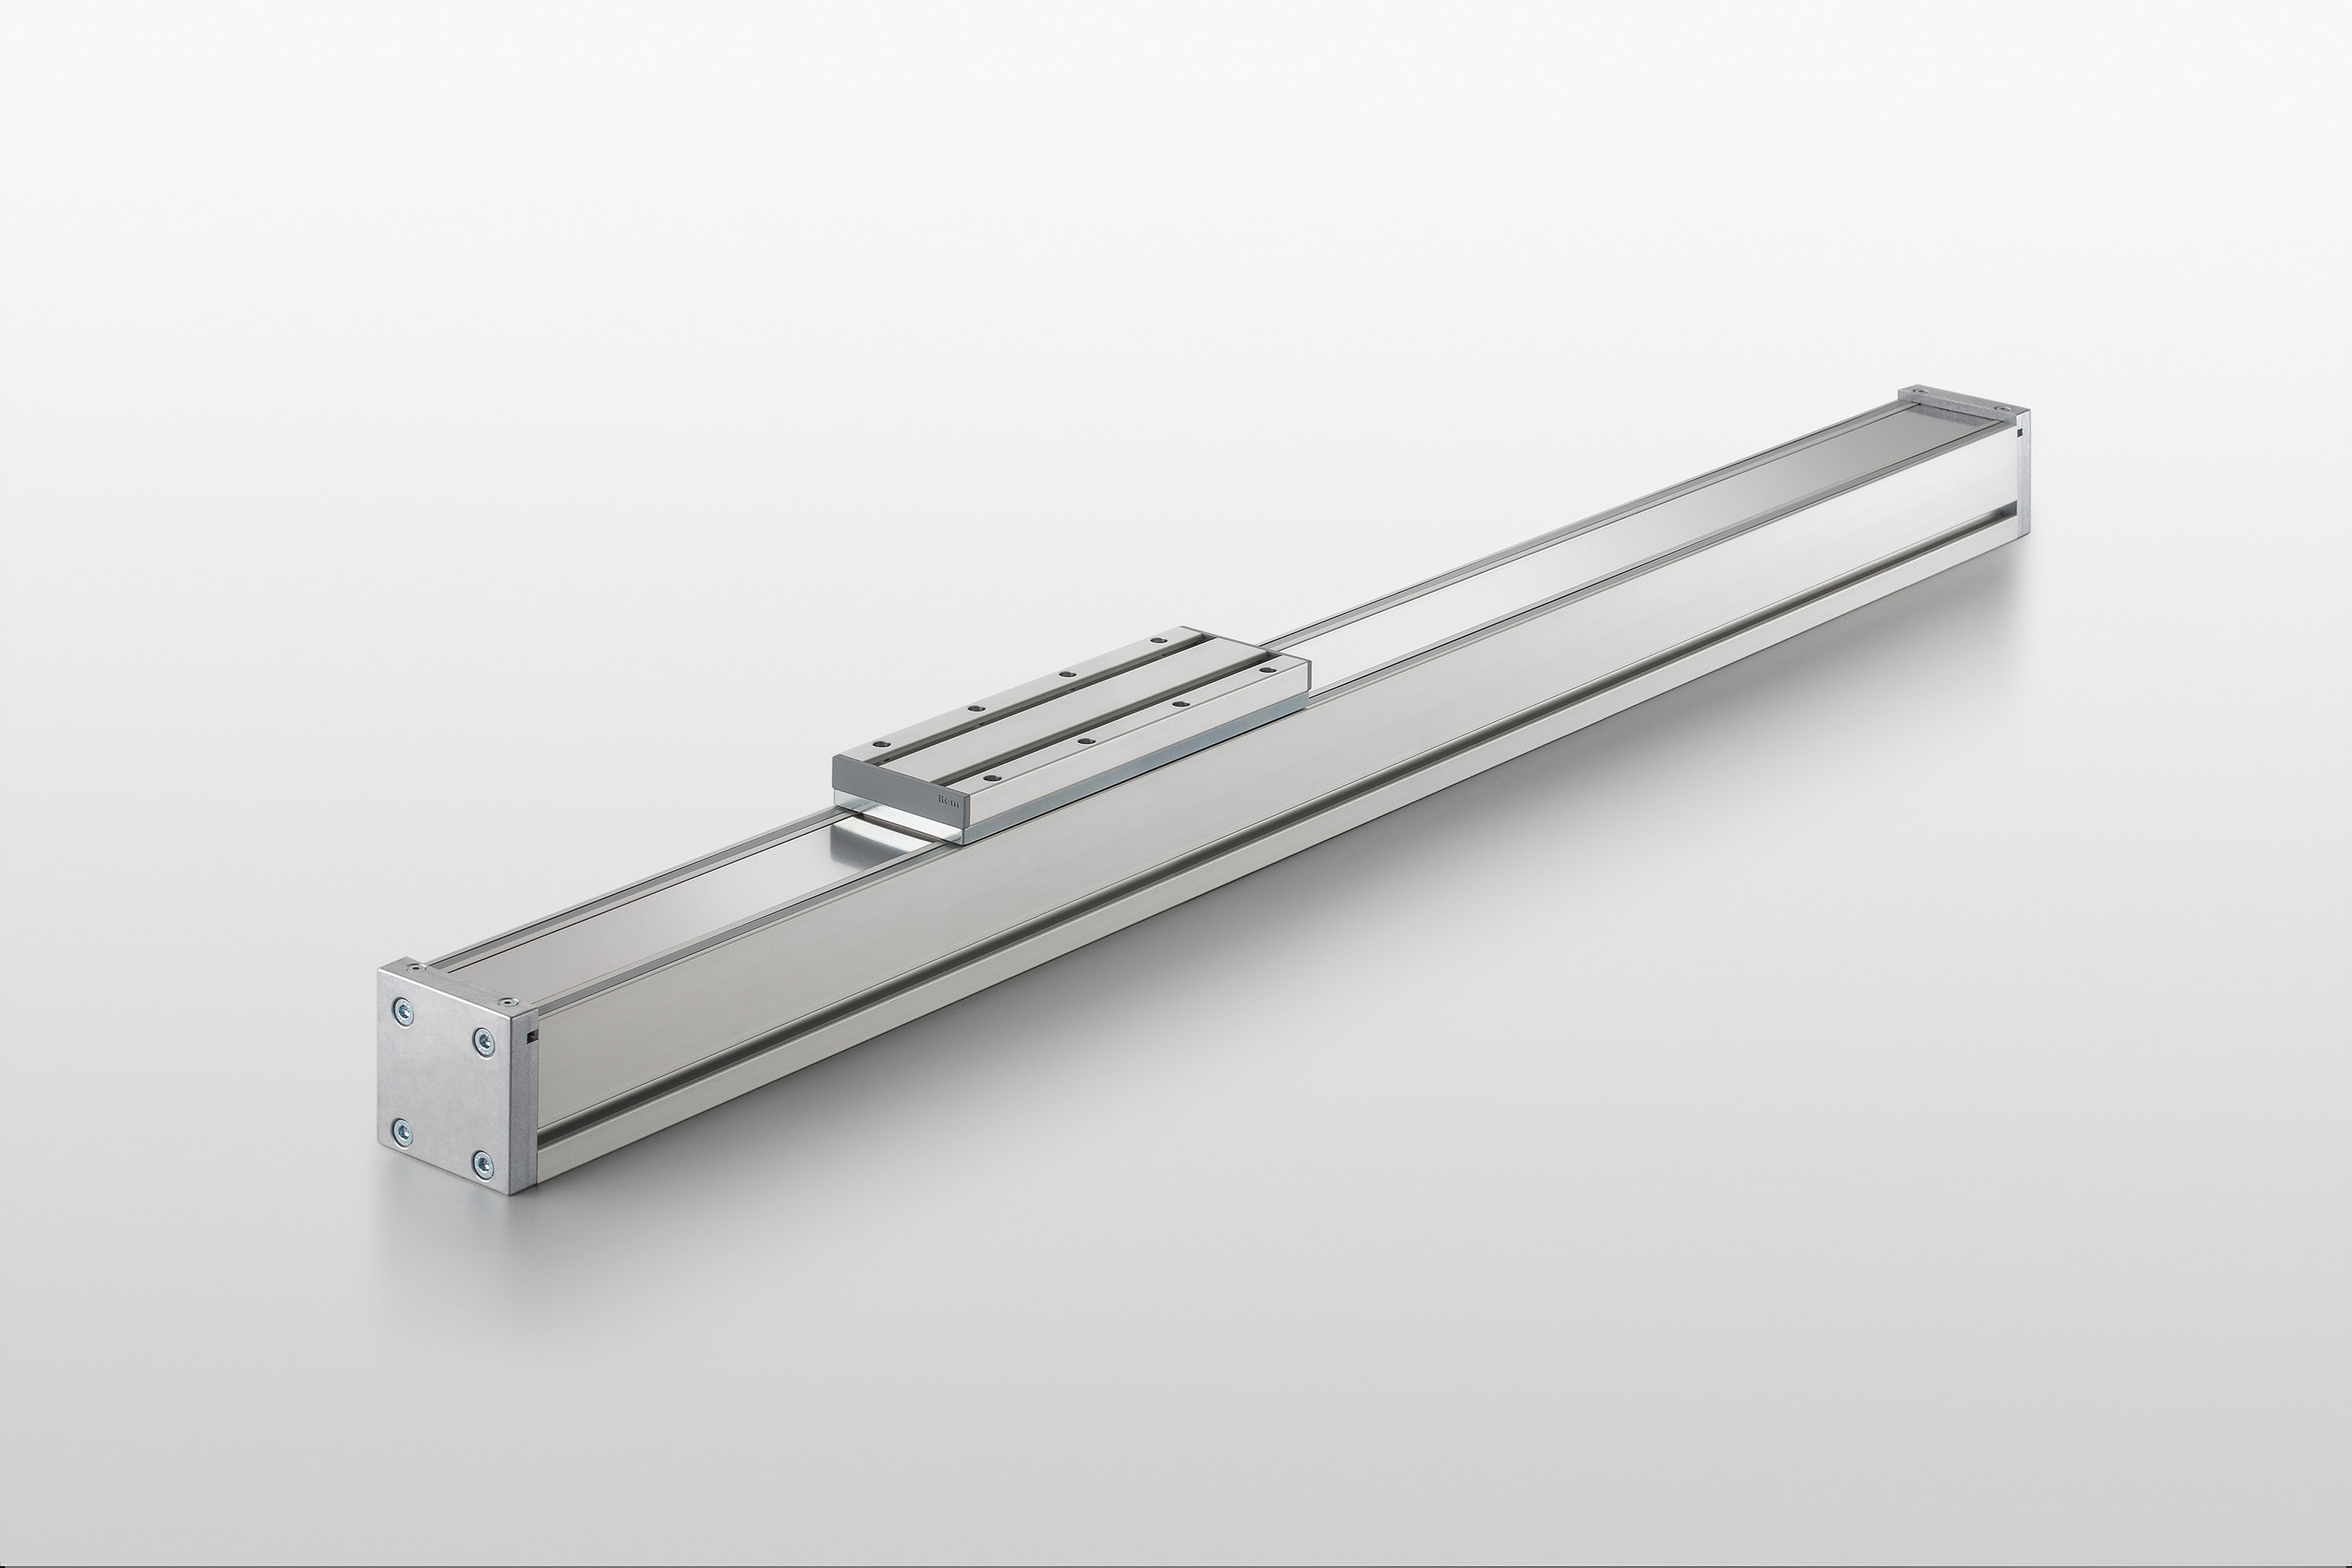 Encapsulated linear guides